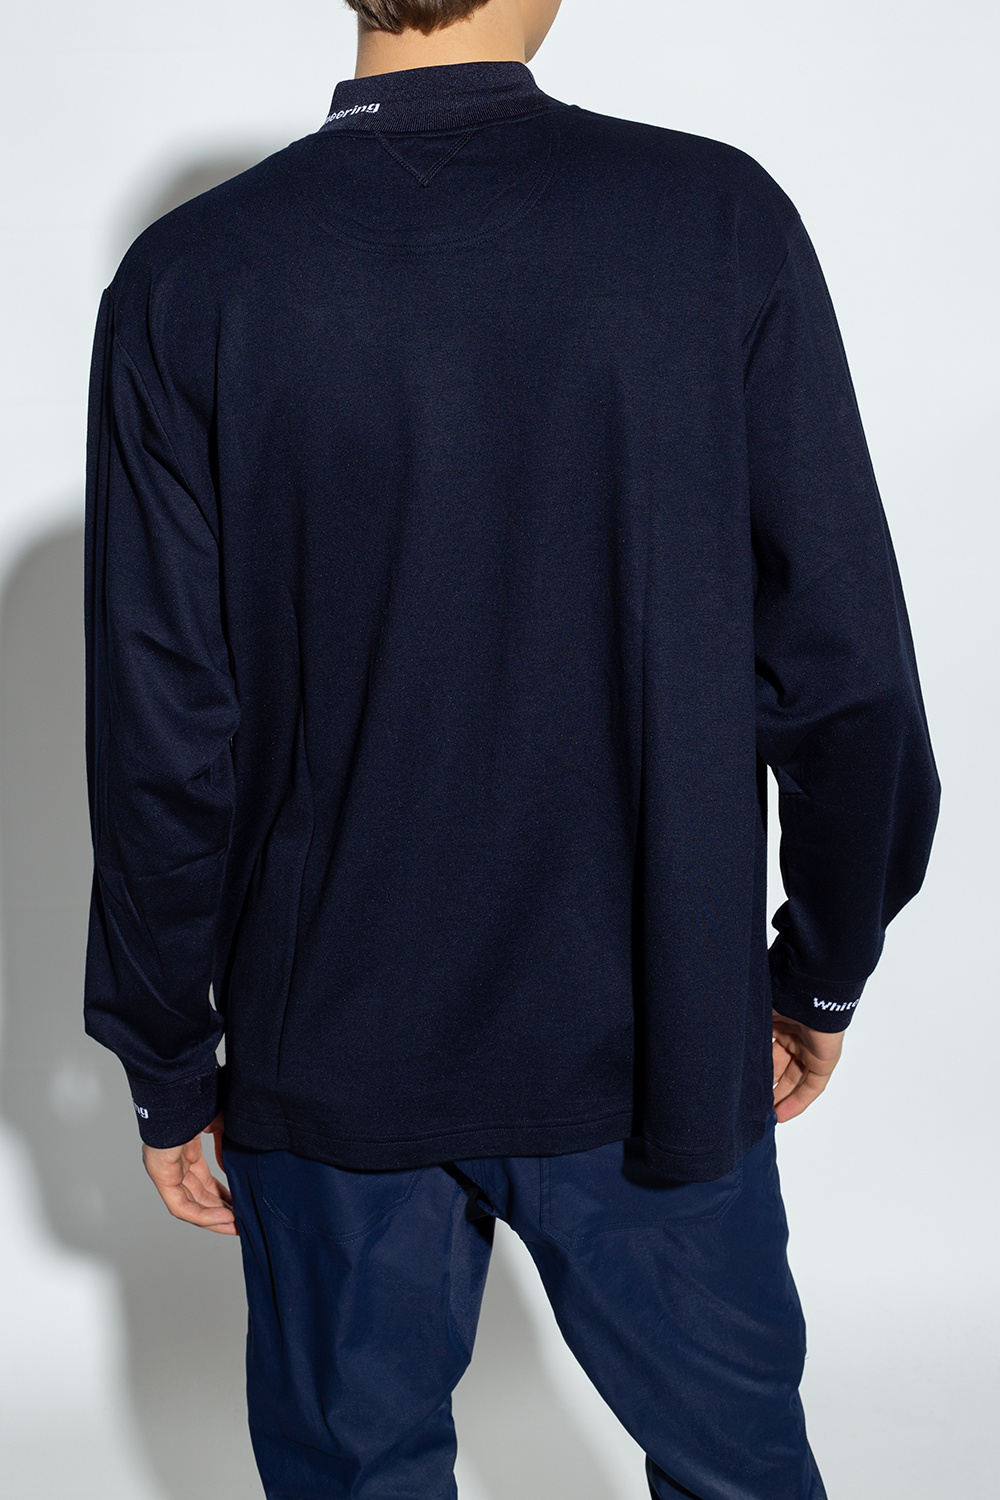 White Mountaineering T-shirt with long sleeves